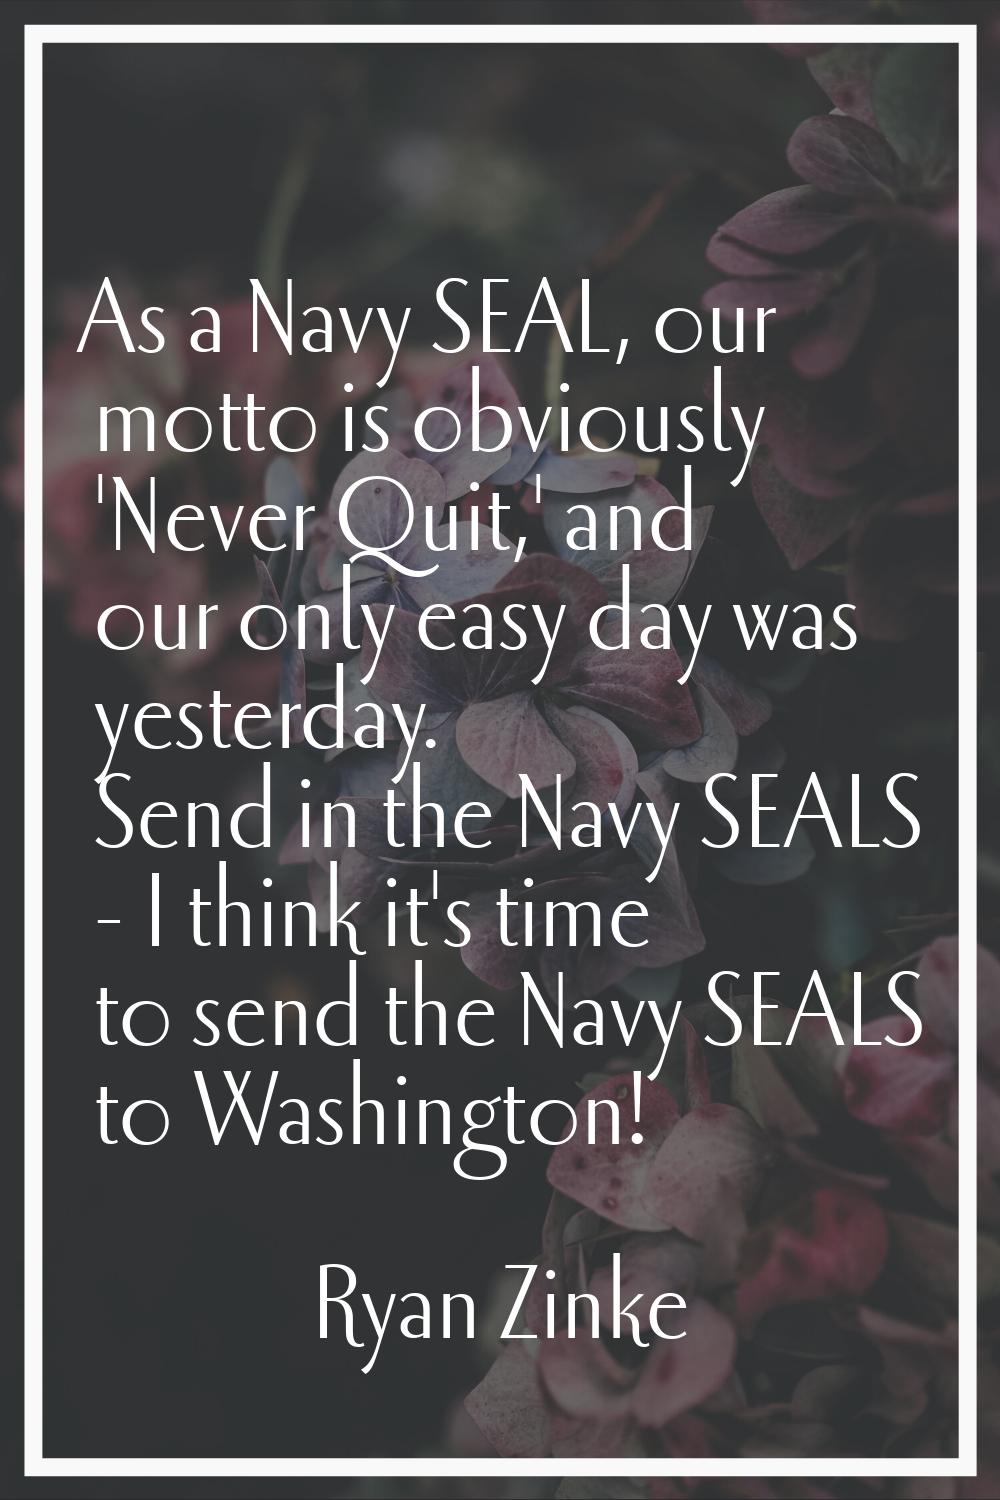 As a Navy SEAL, our motto is obviously 'Never Quit,' and our only easy day was yesterday. Send in t